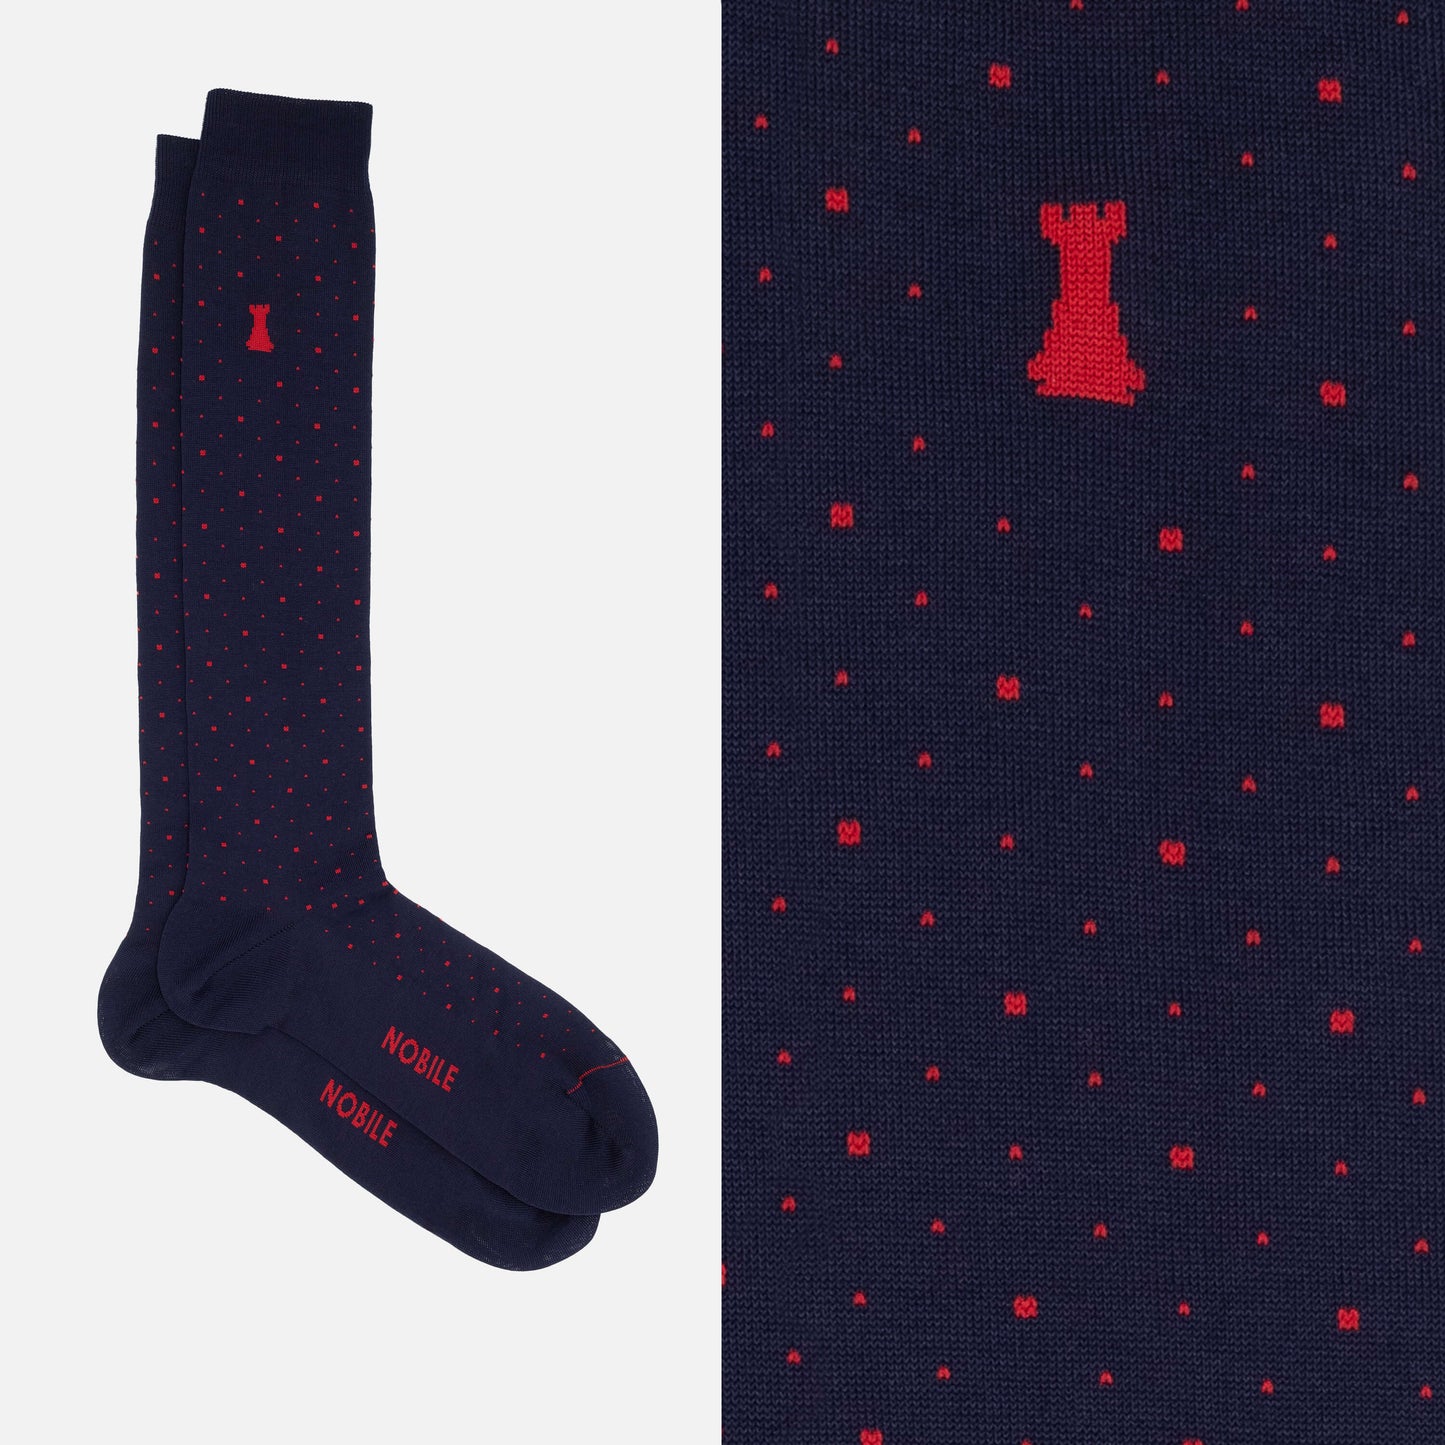 Louis XIV - Blue knee high socks with dots